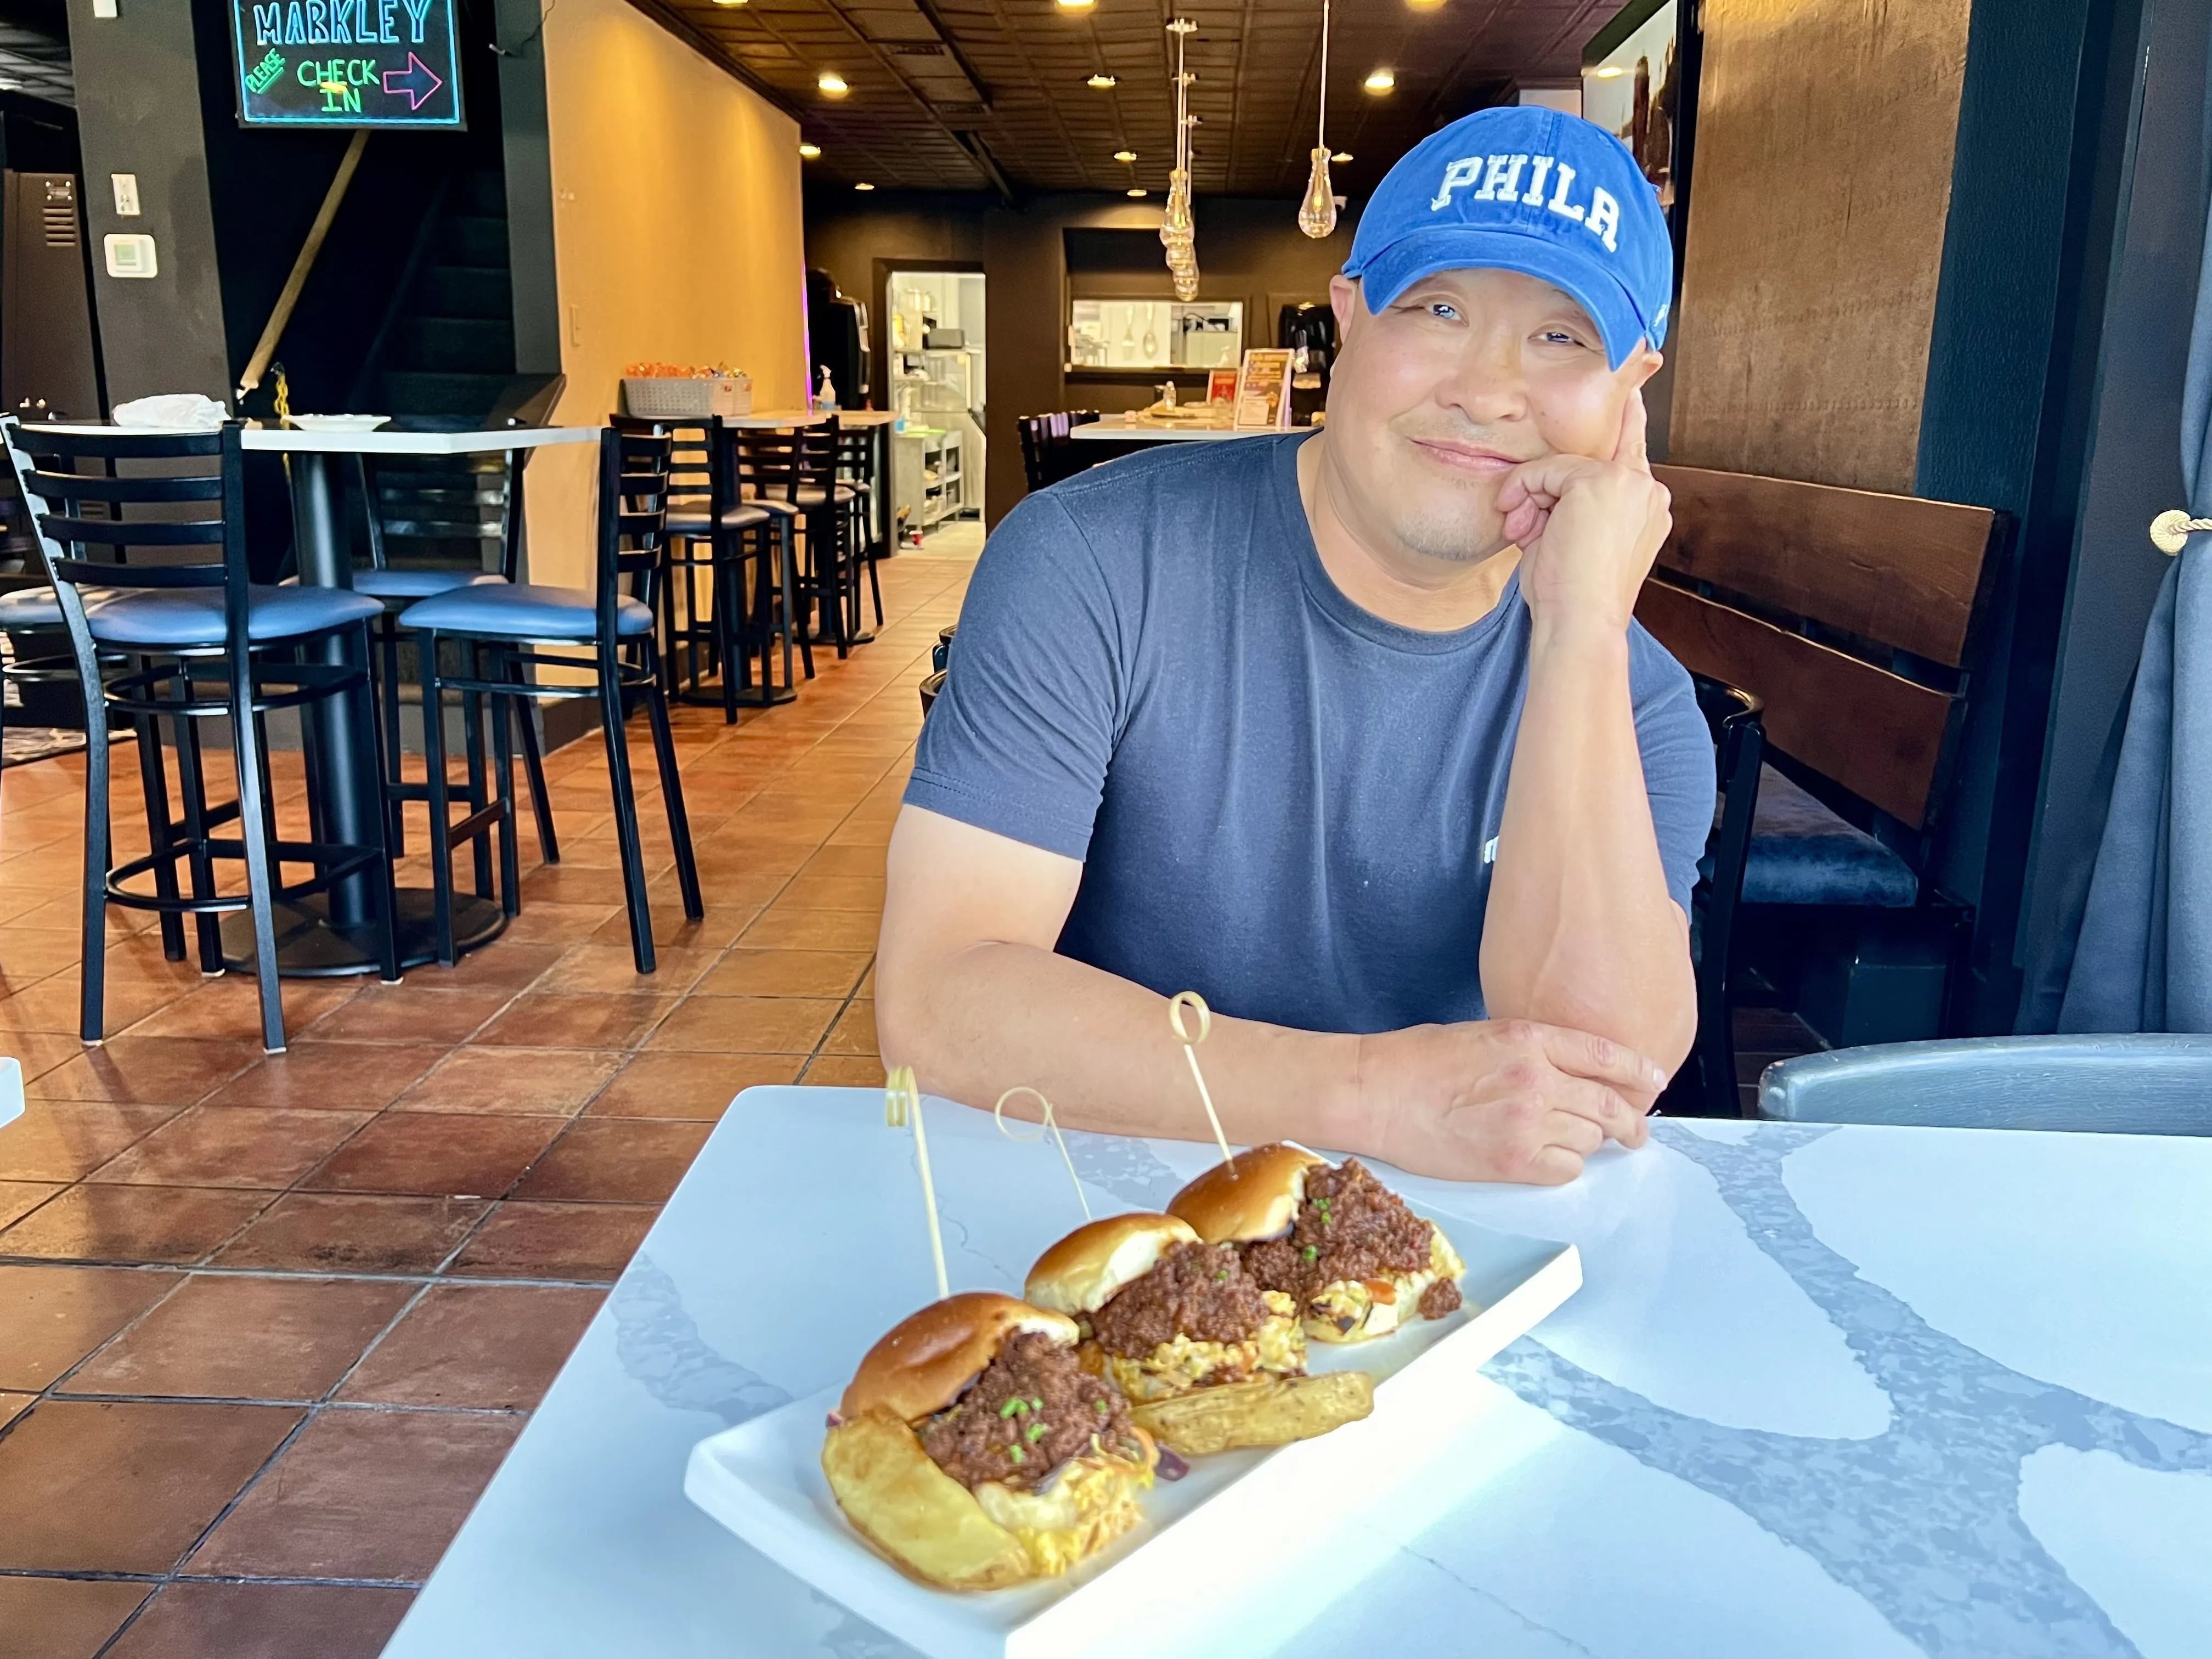 Chef Chino Chang with sliders at the Markley, a skill-game arcade at 1729 Markley St. in Norristown.